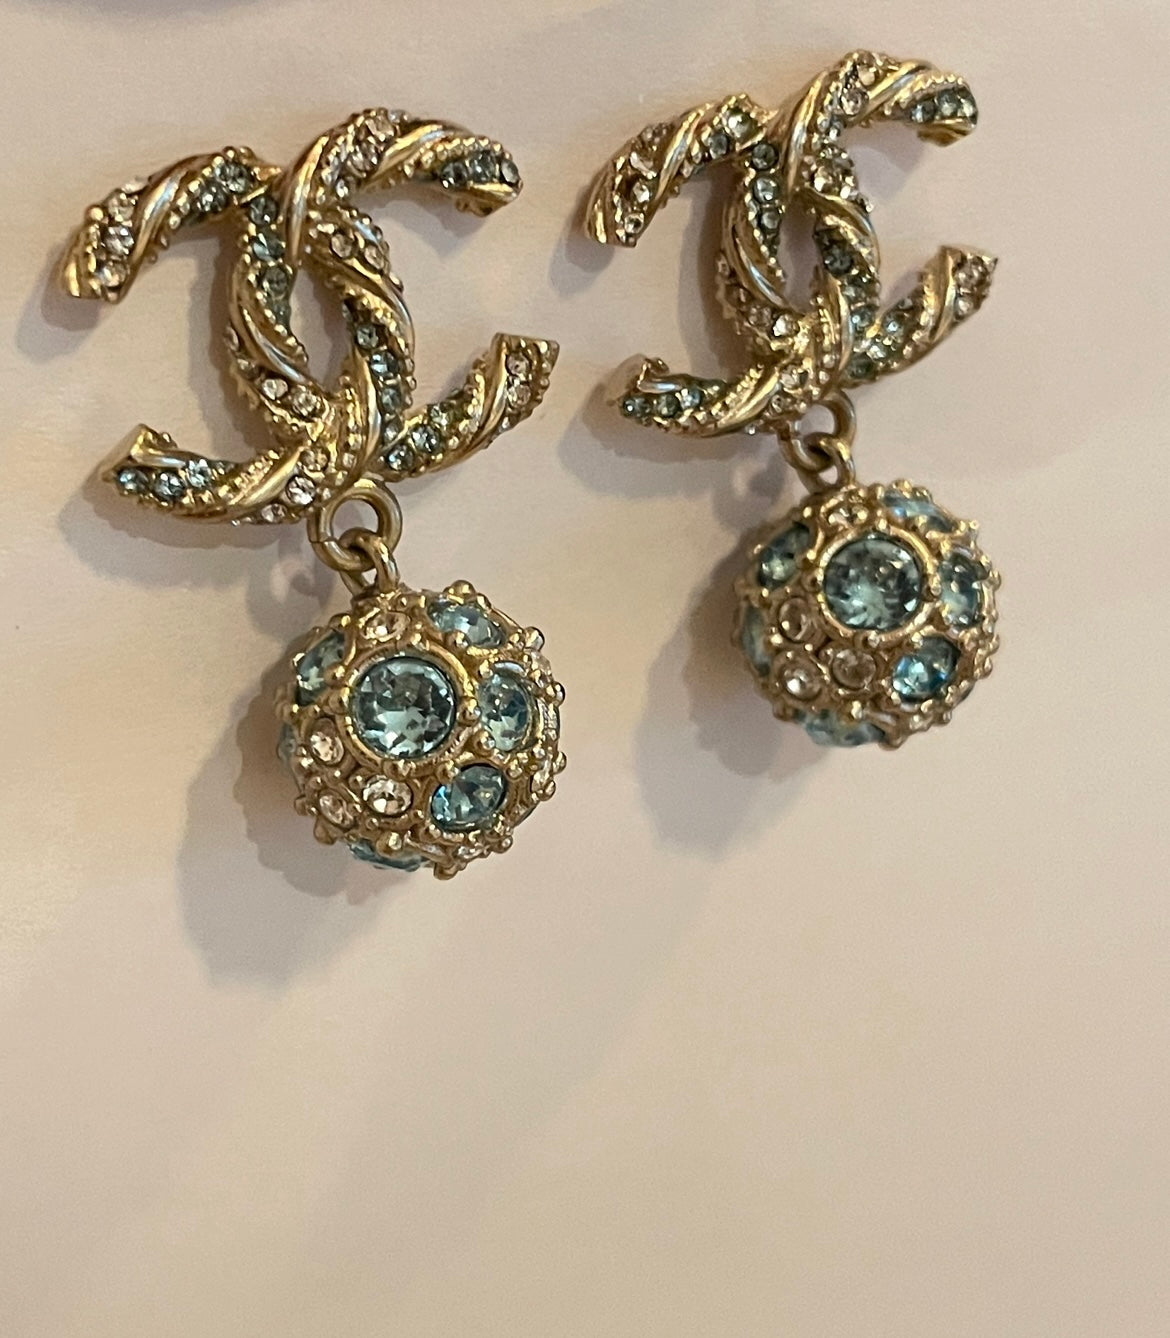 Chanel Drop Earrings With Blue Crystals - Lou's Closet